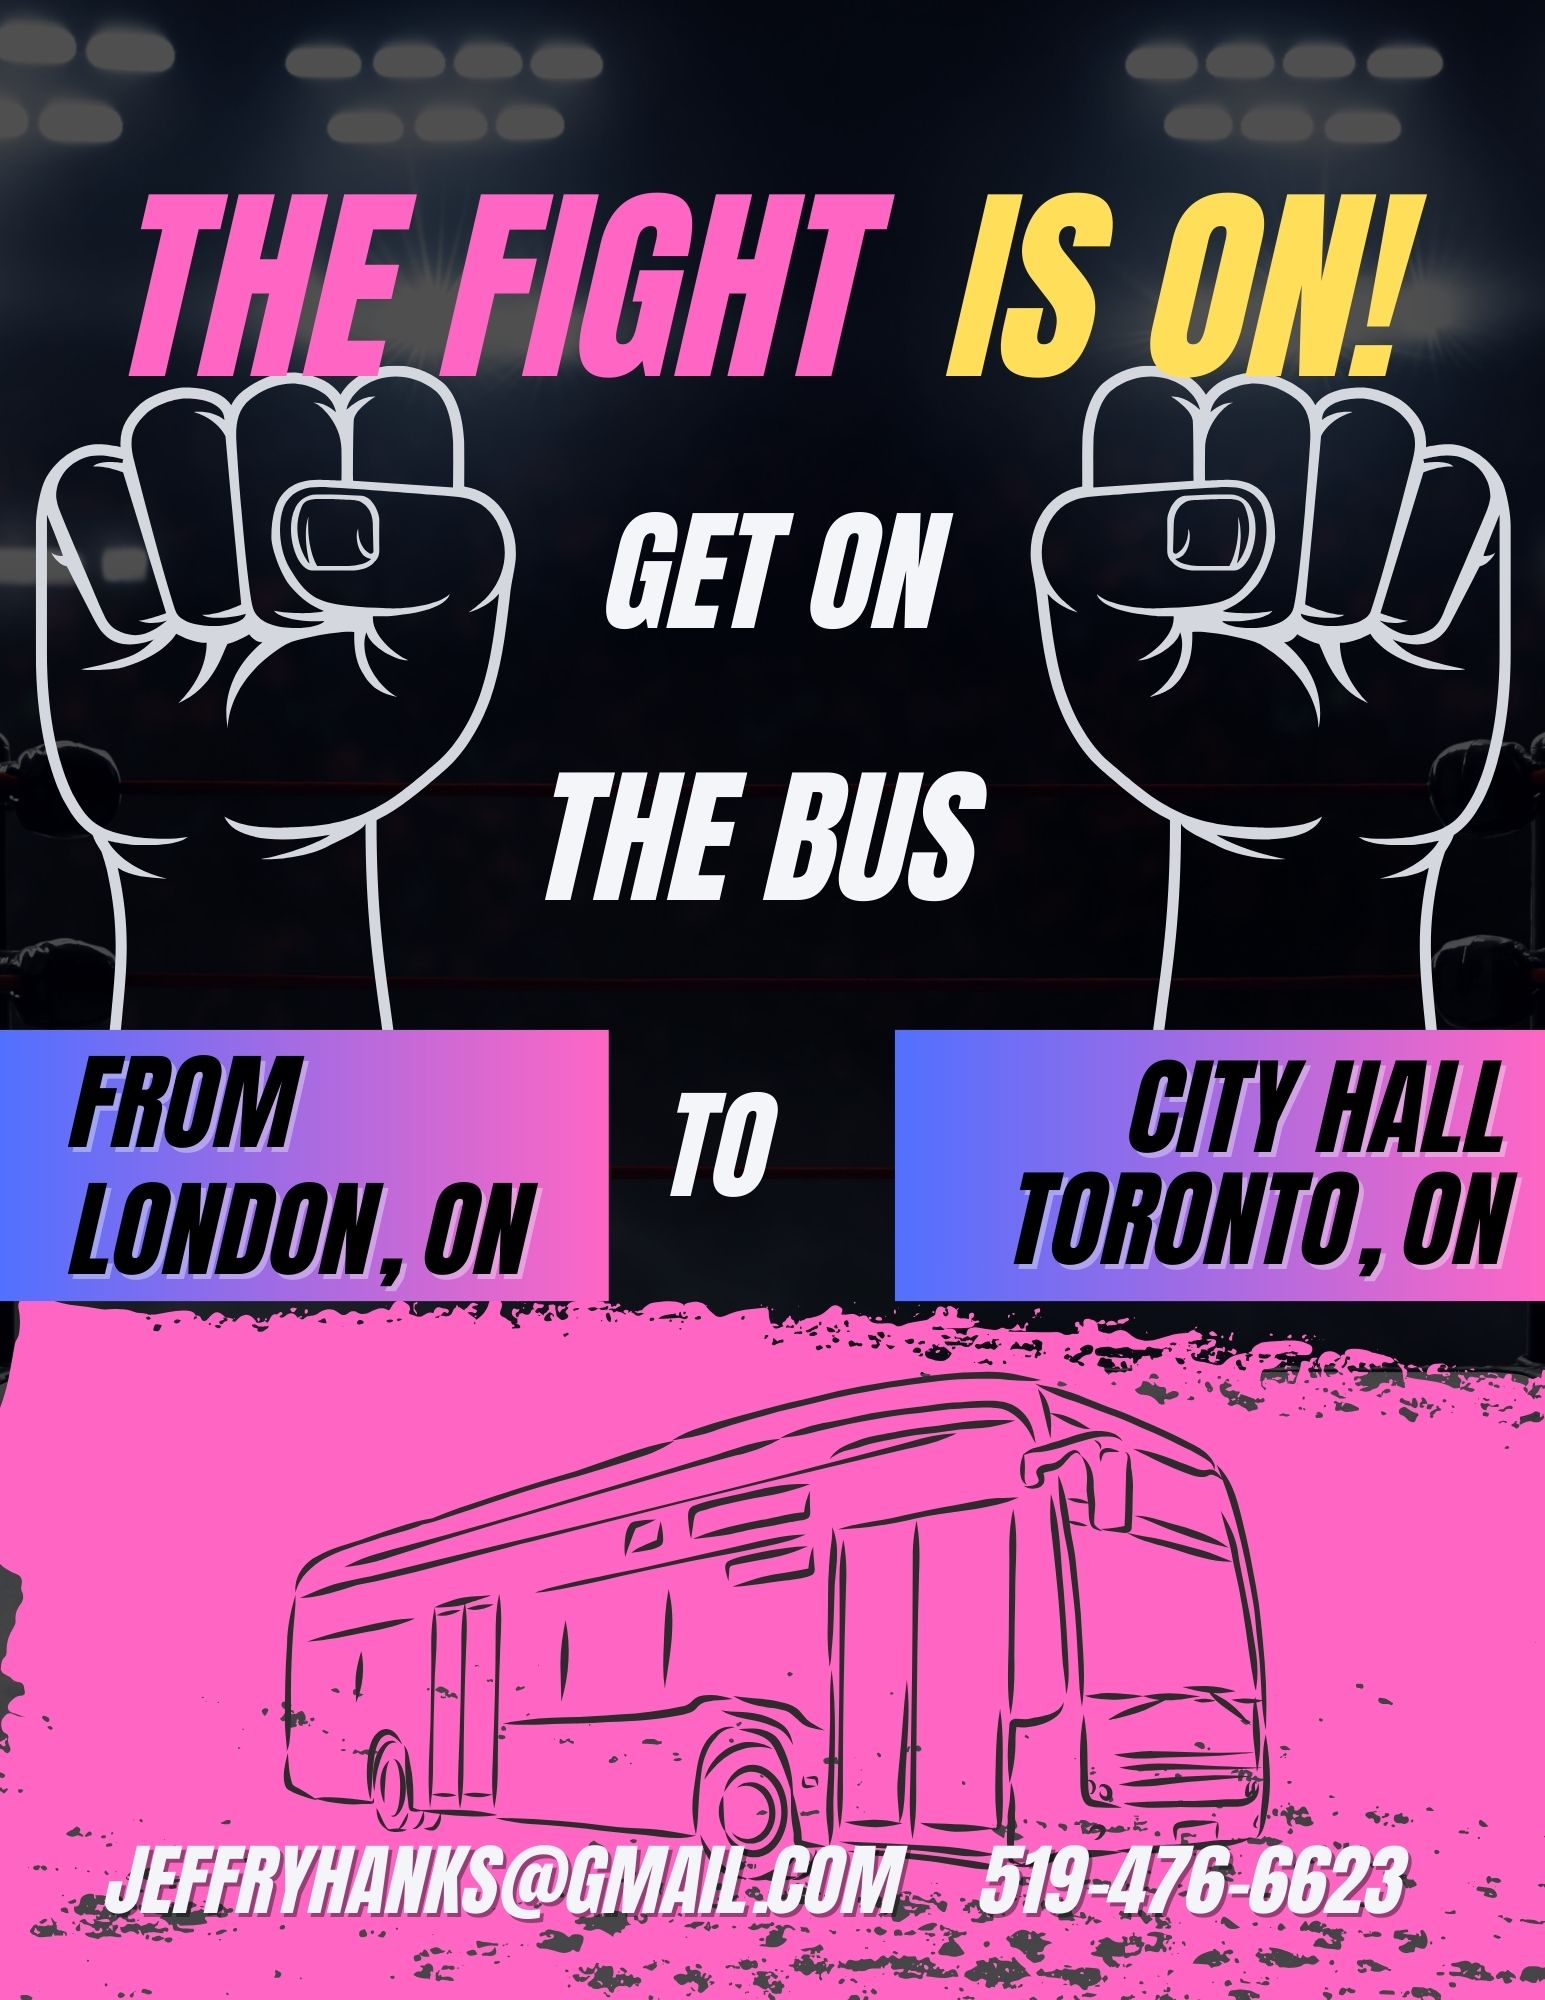 The fight is on. Get on the bus. jeffryhanks@gmail.com